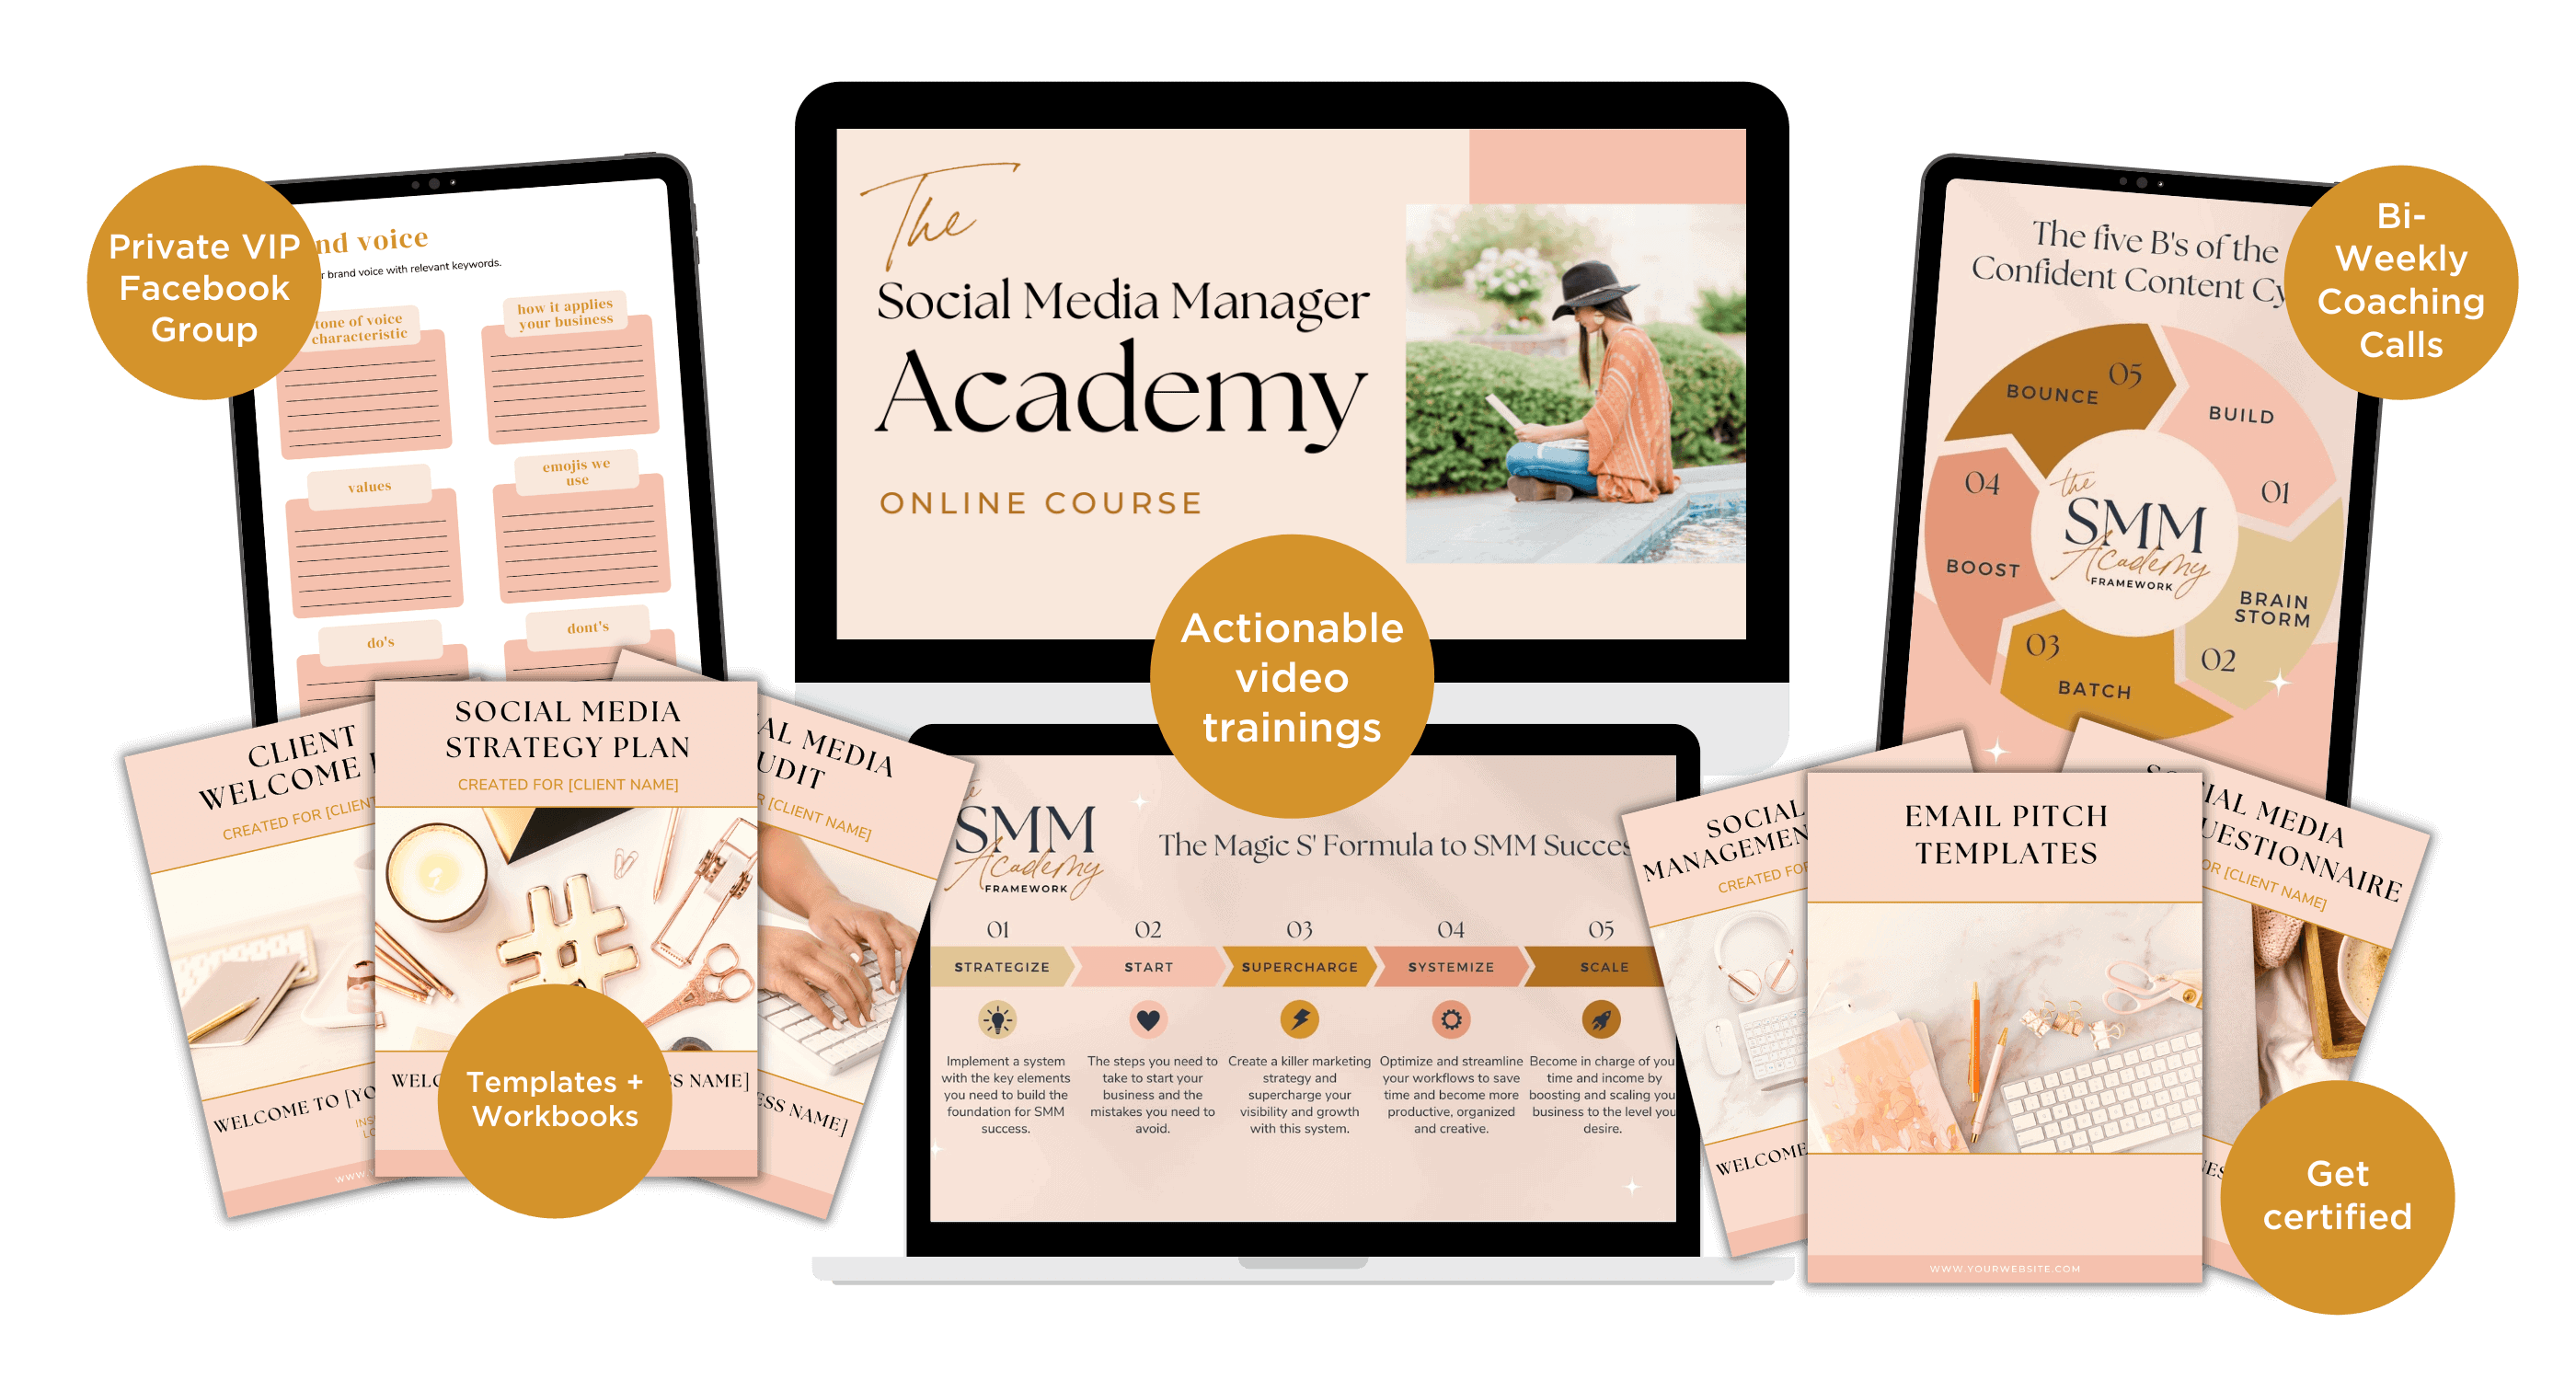 the social media manager academy